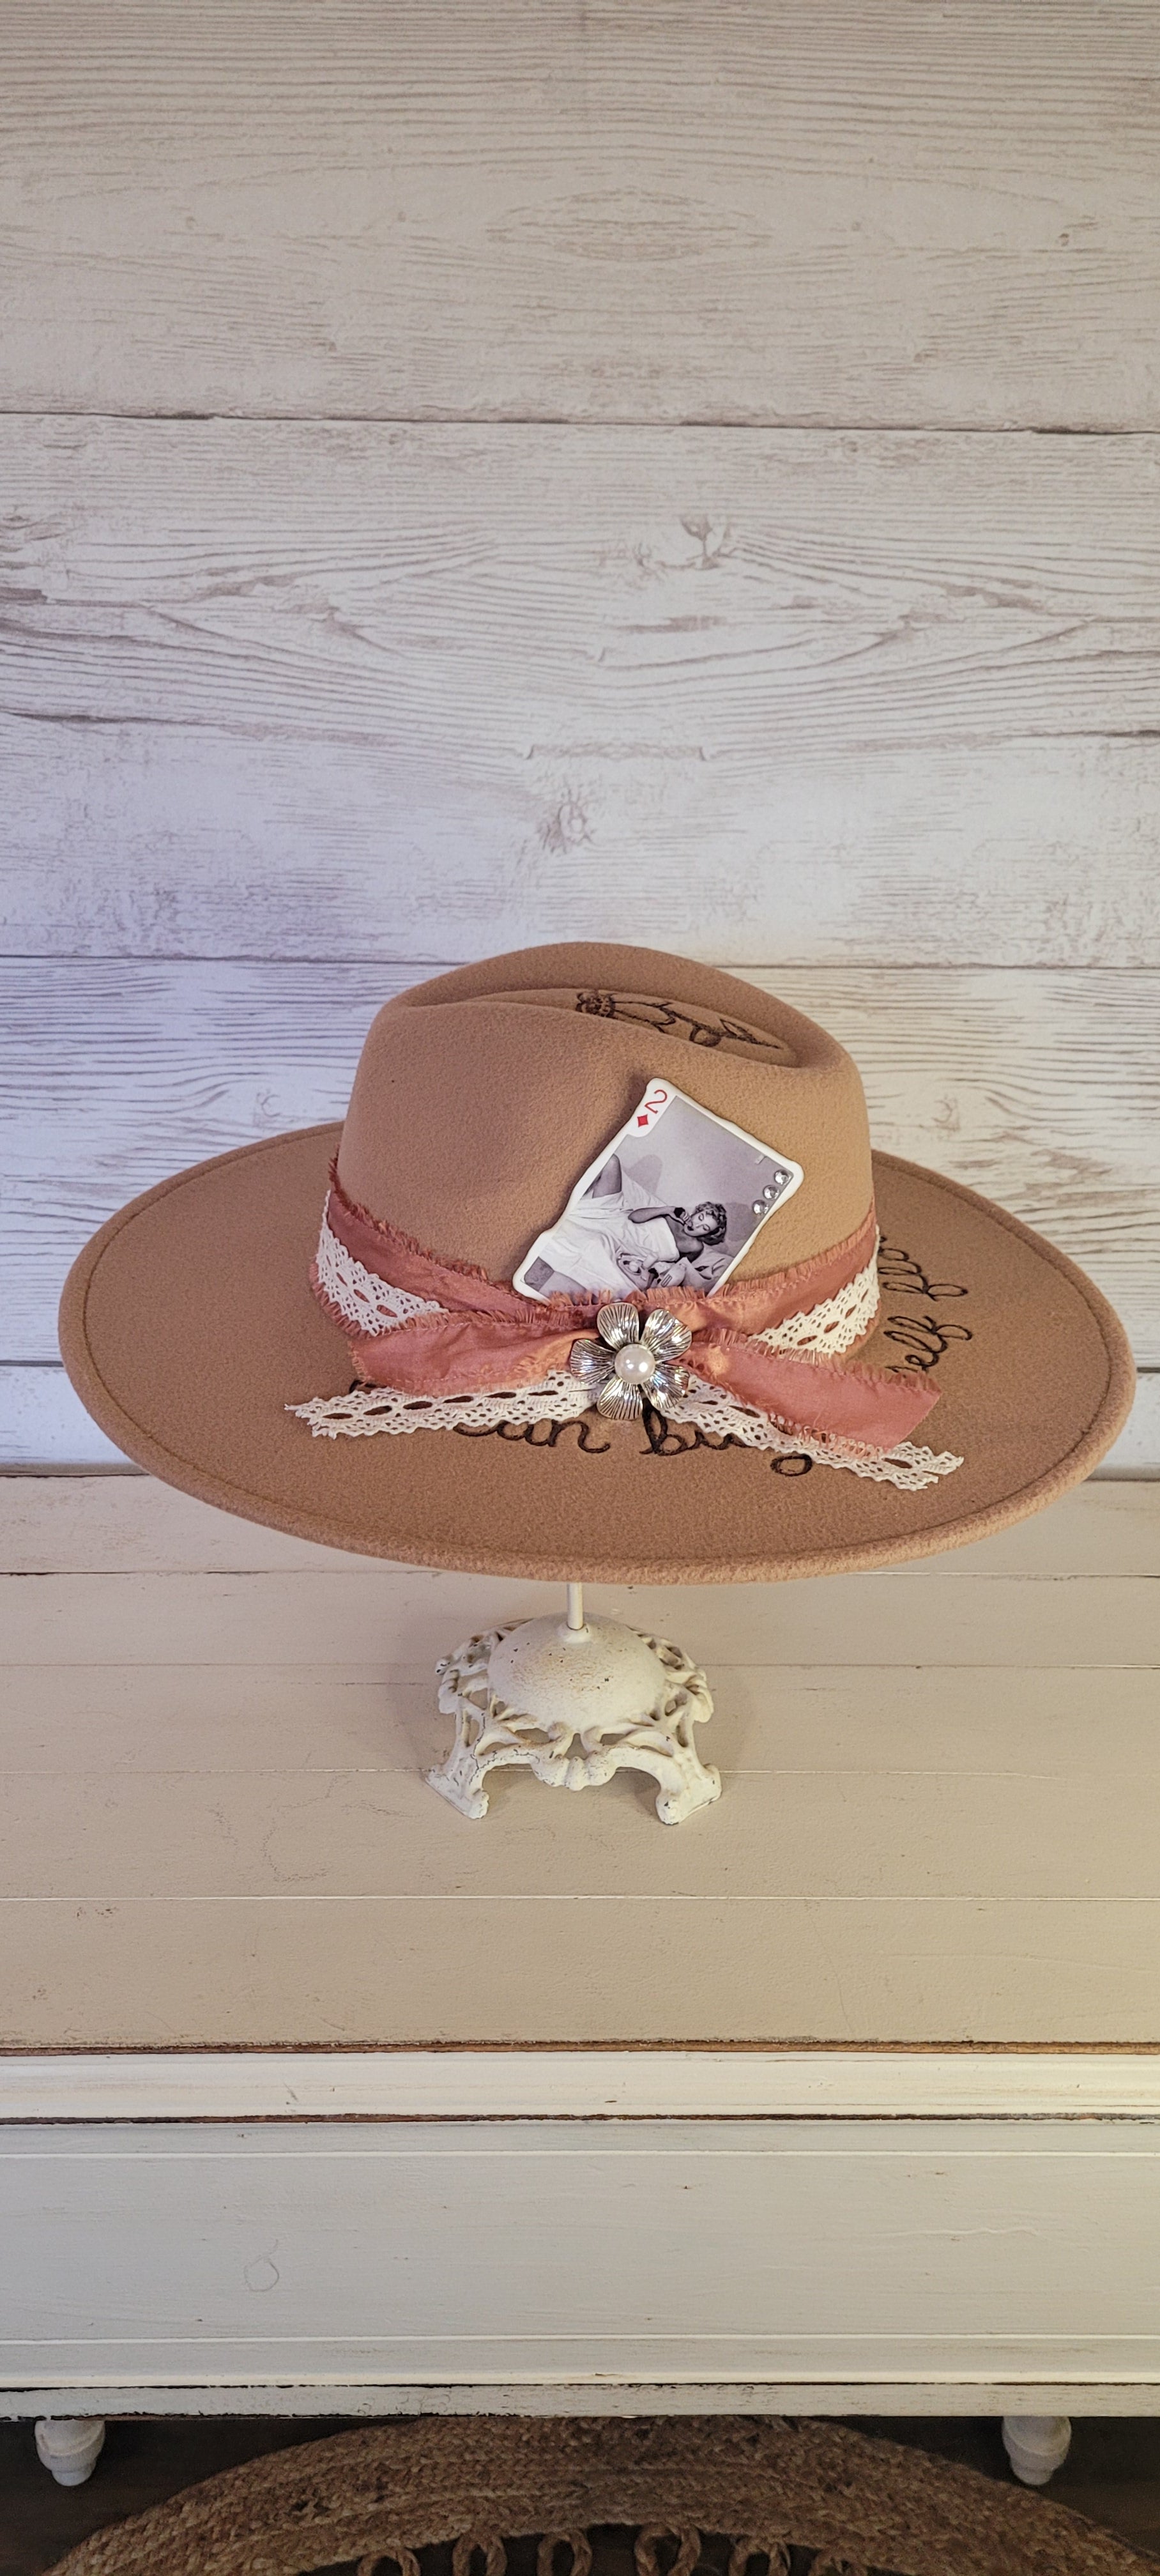 Features "I can by myself flowers" & flowers engraved Frayed rose ribbon, natural lace ribbon with flower brooch & playing card Felt hat Flat brim 65% polyester and 35% cotton Ribbon drawstring for hat size adjustment Head Circumference: 24" Crown Height: 5" Brim Length: 15.75" Brim Width: 14.5" Branded & numbered inside crown Custom burned & engraved by Kayla